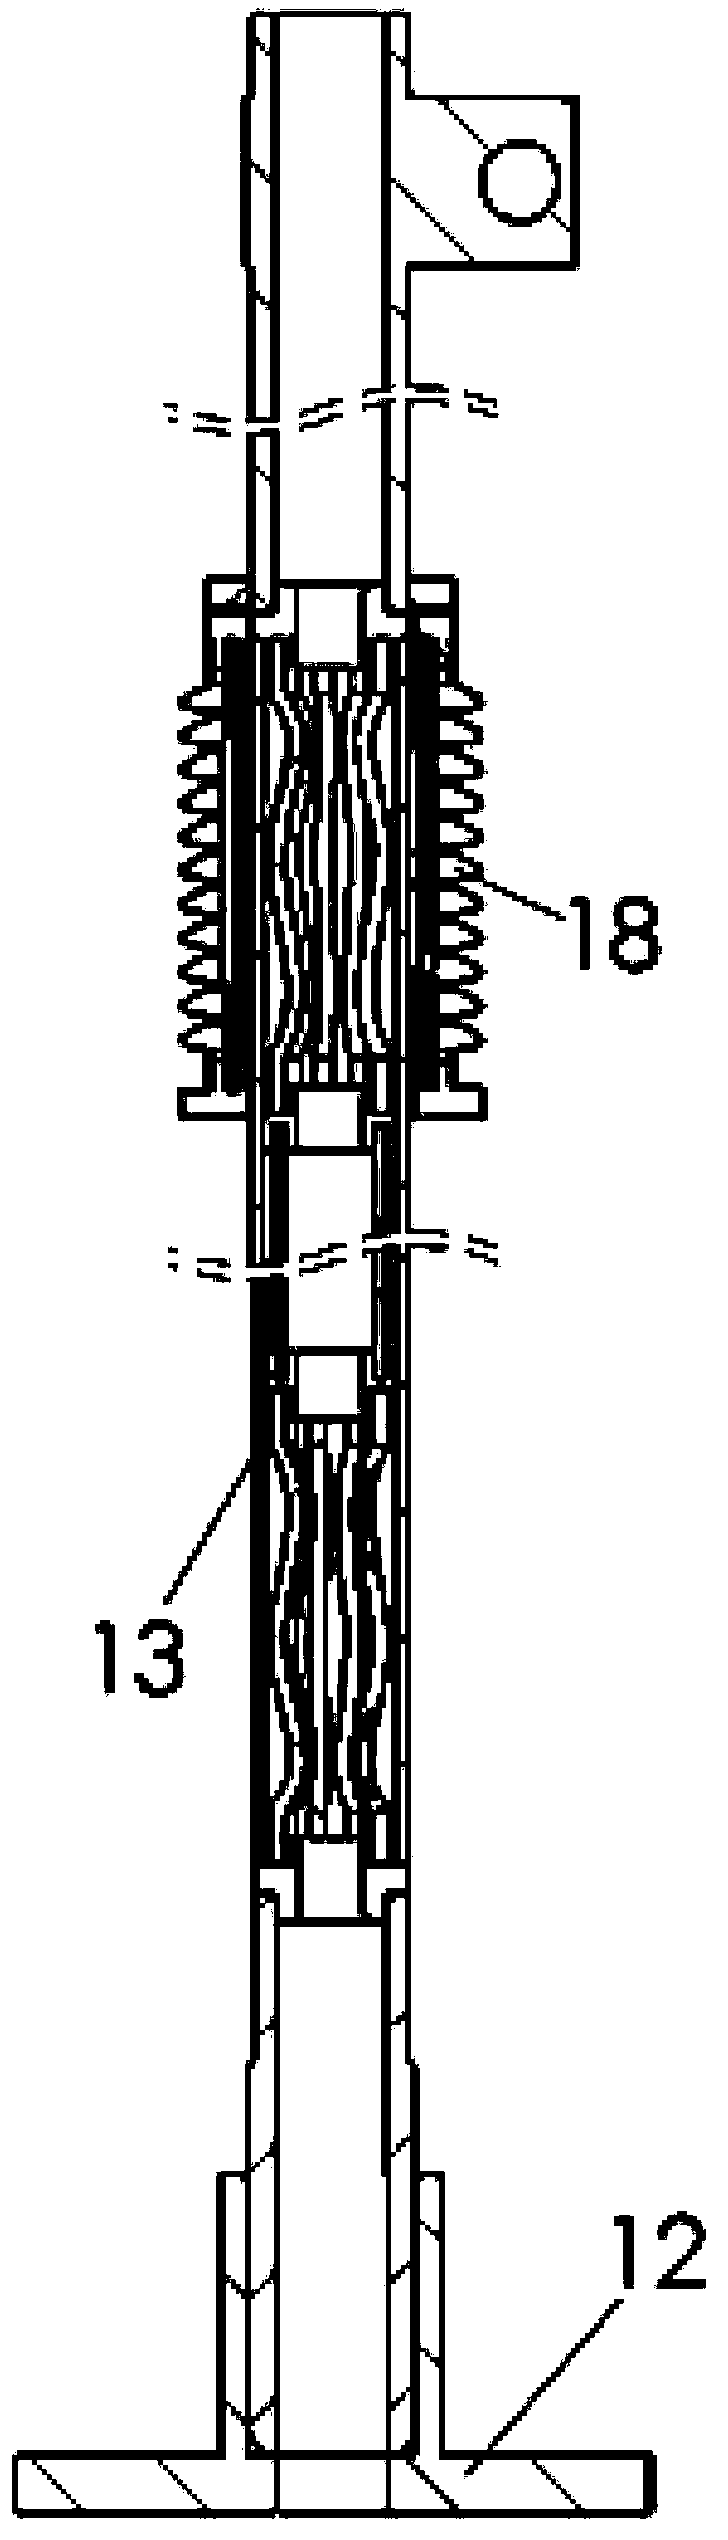 Binary pluggable vapor cooled current lead device